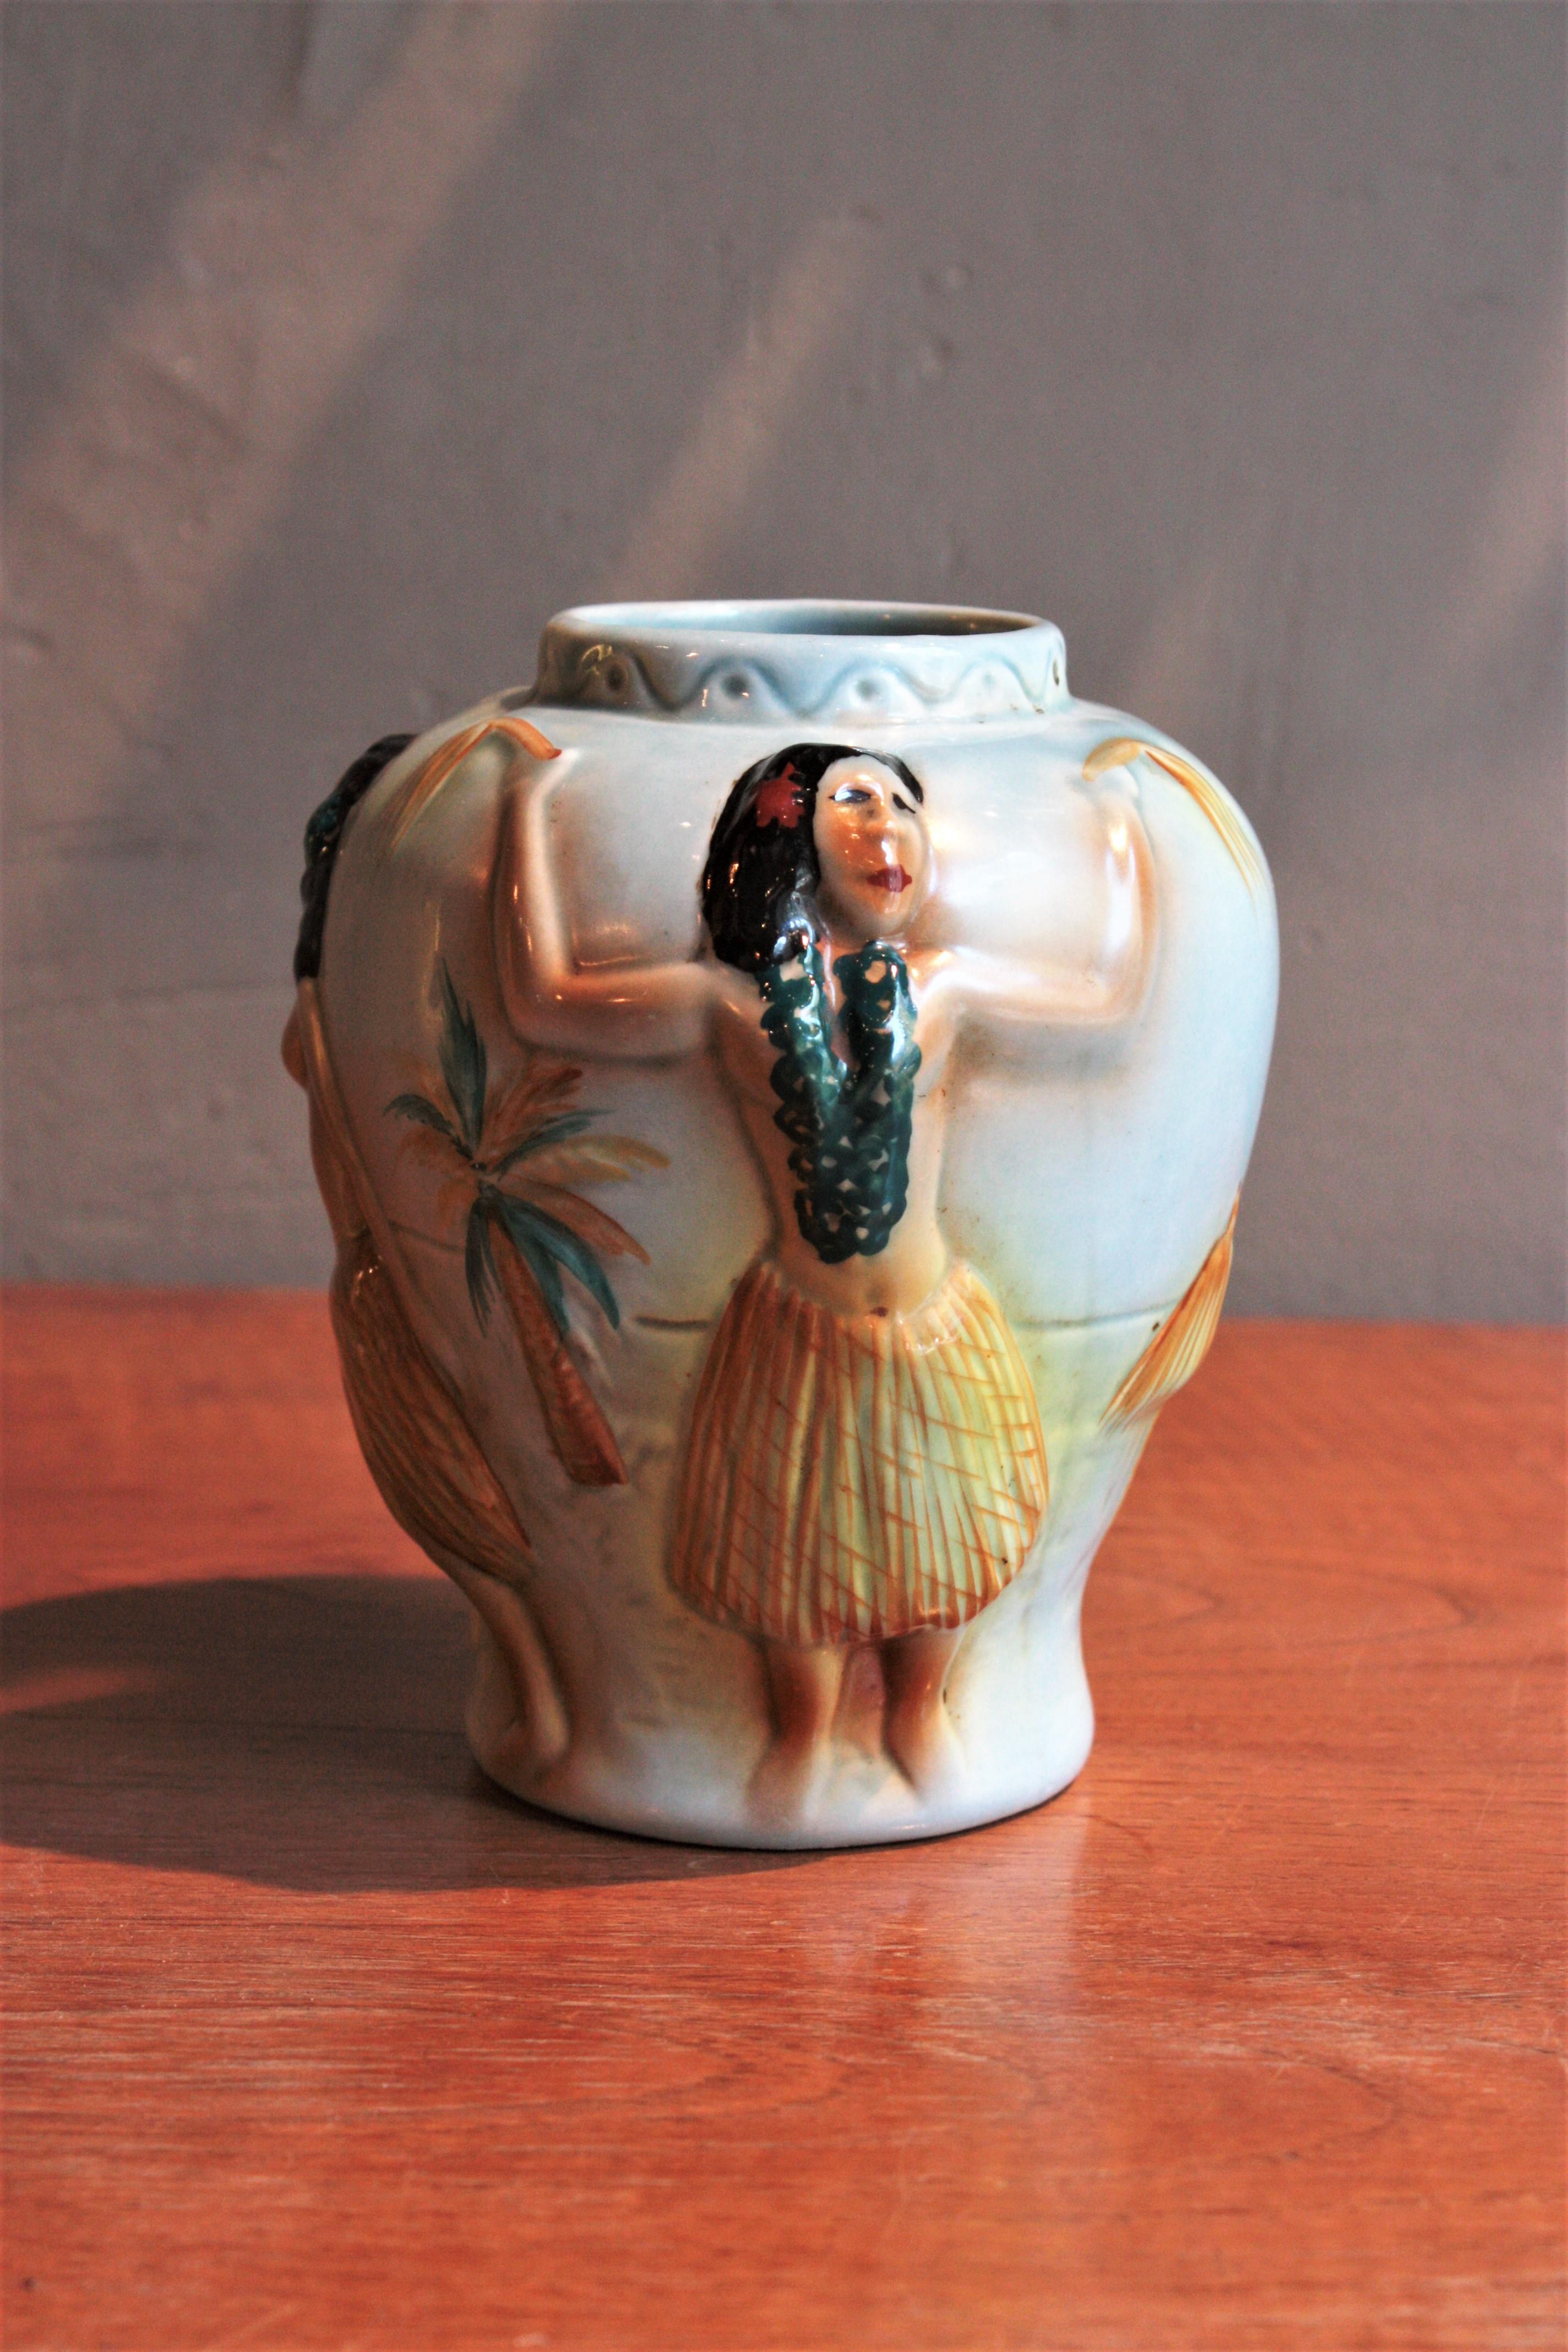 Colorful Midcentury Ceramic Urn vase, Spain, 1950s-1960s.
Beautiful small blue glazed ceramic vase featuring hand-painted hawaian Hula dancers.
Eye-catching from all sides.
It will be a nice addition to any ceramics collection. Perfect as a gift